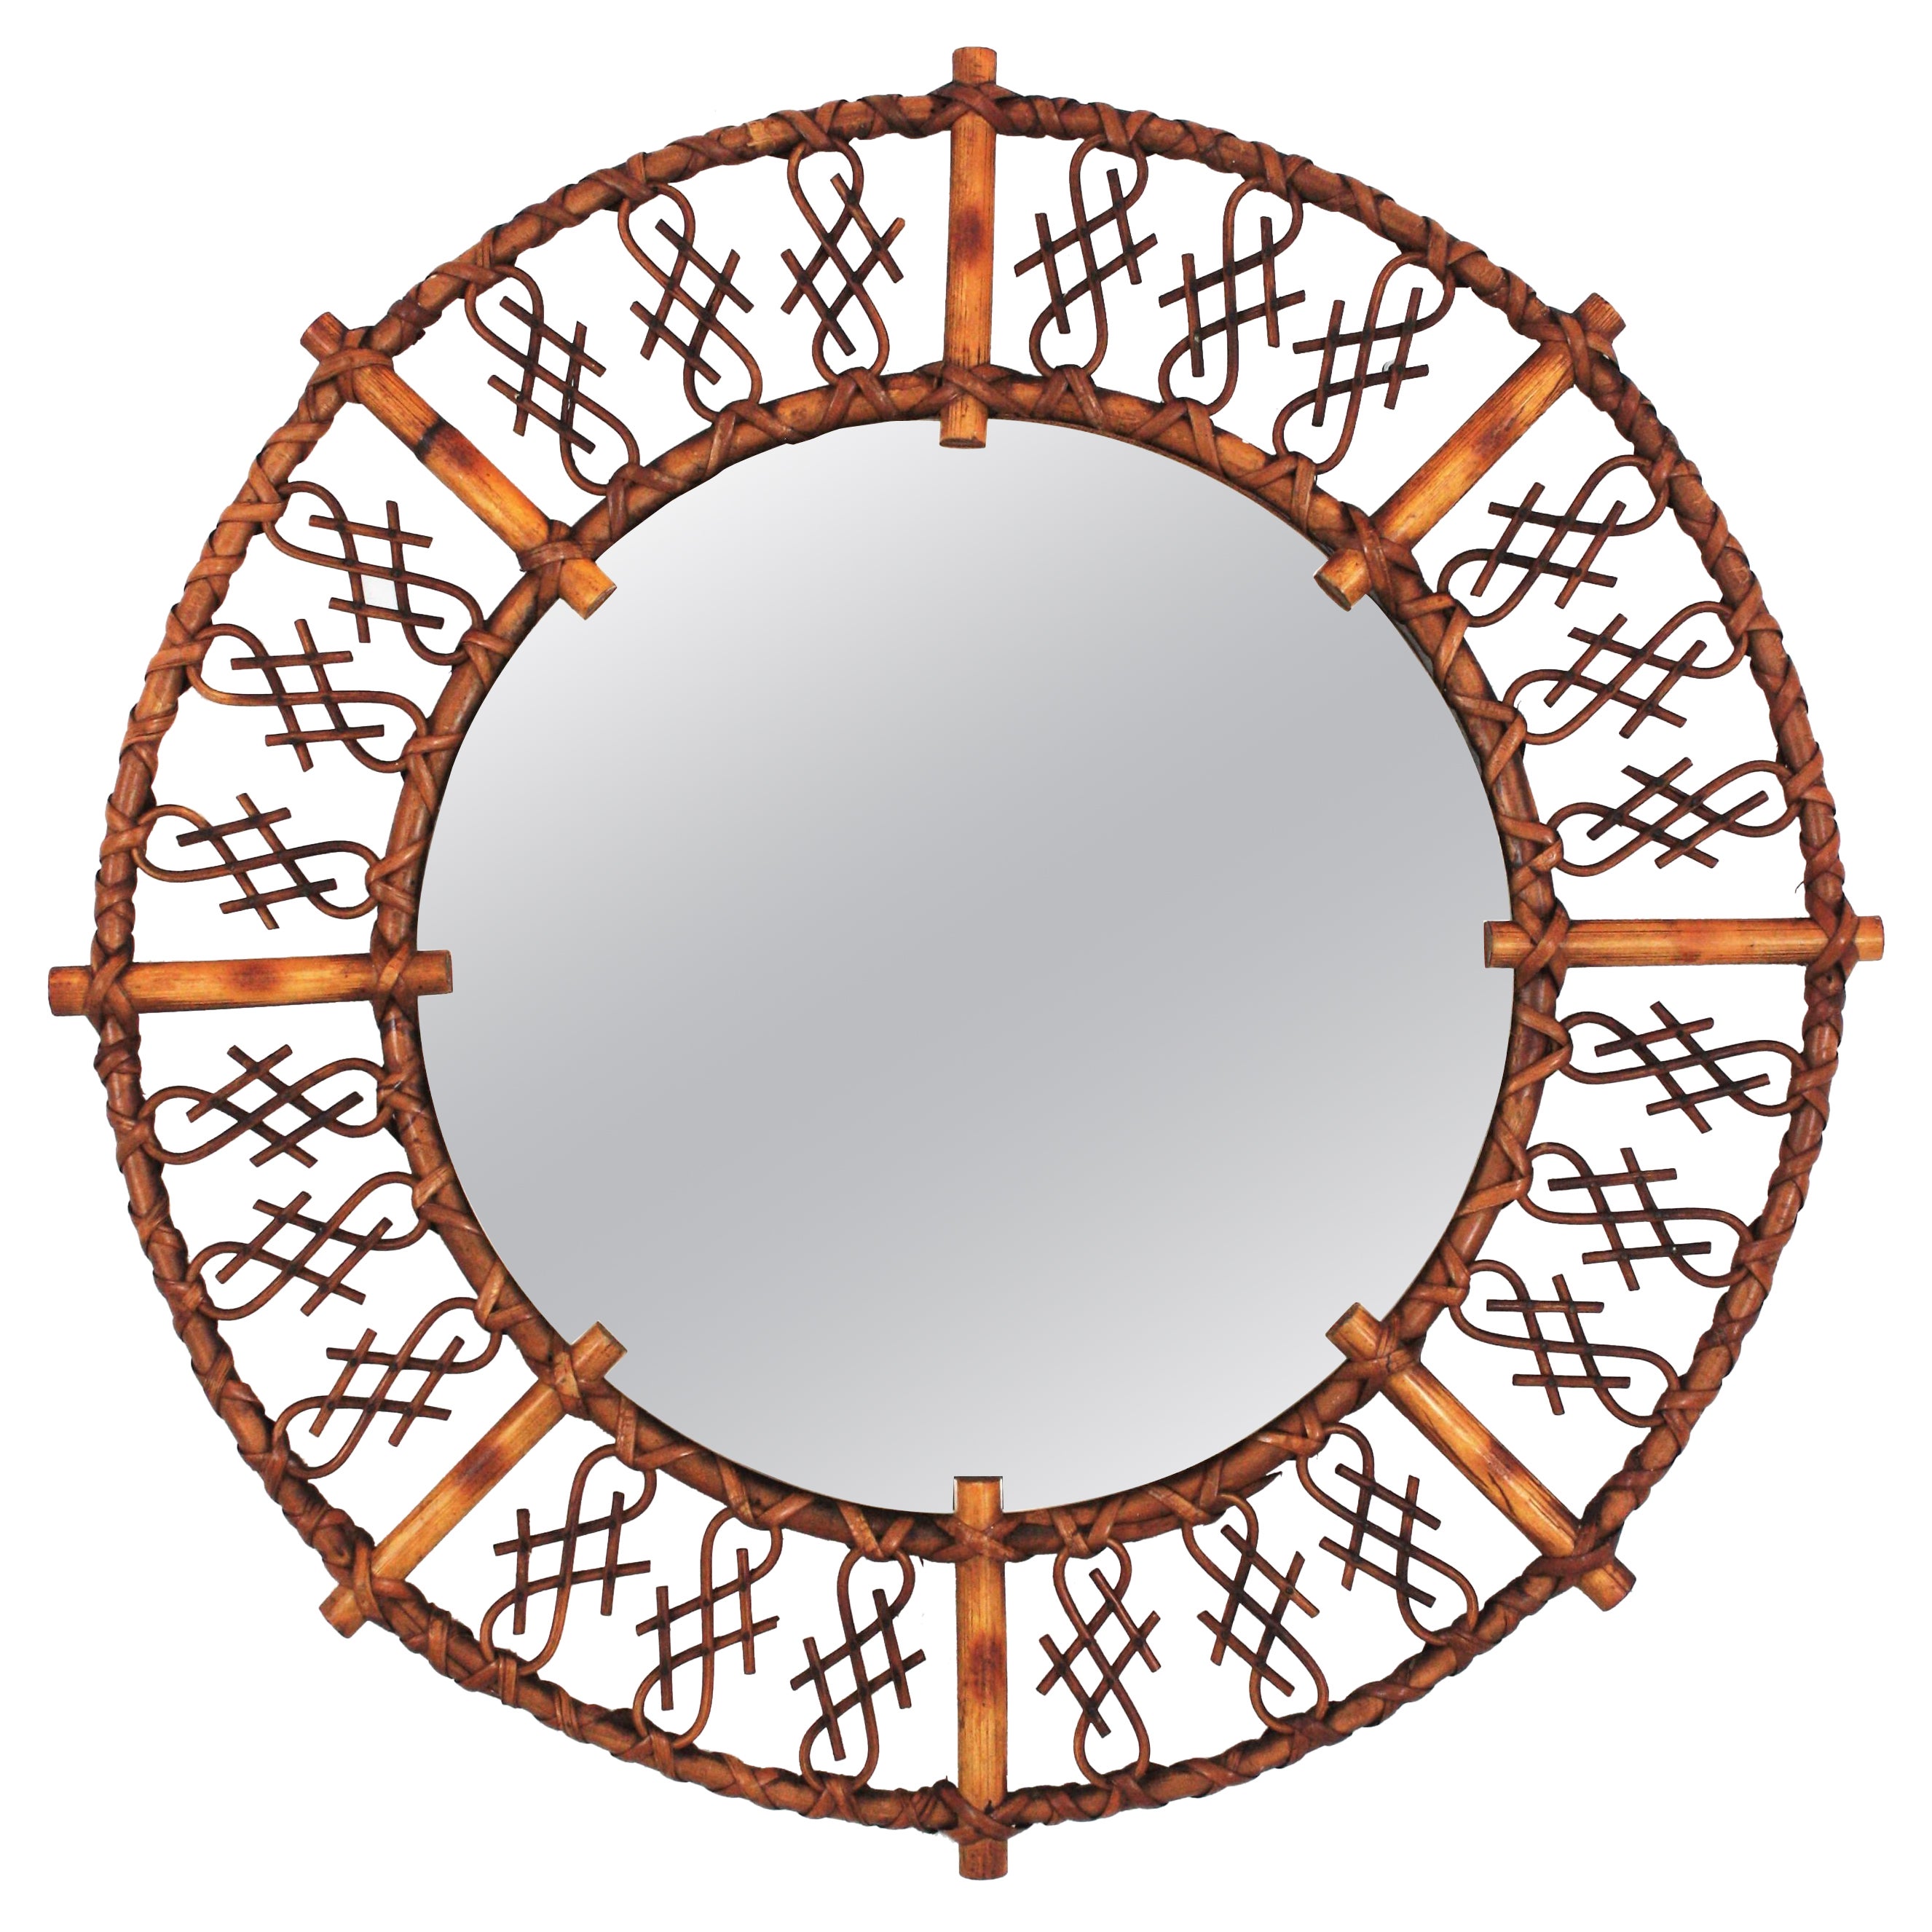 Rattan Bamboo Round Mirror with Chinoiserie Accents, France, 1960s